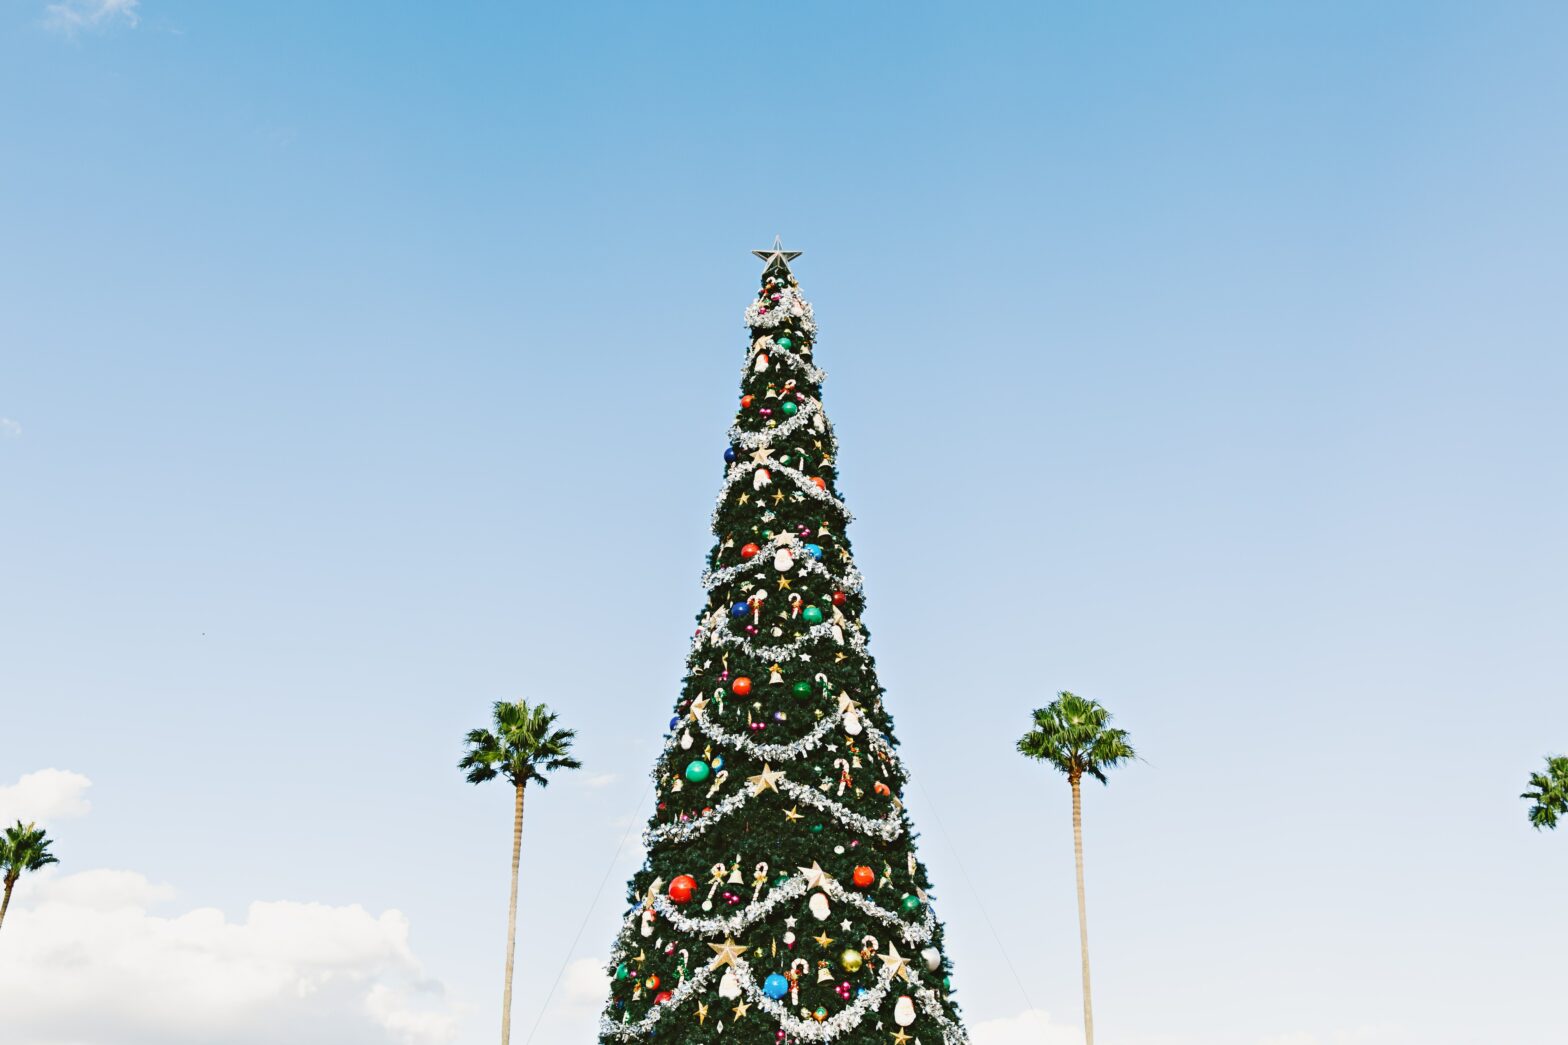 A Christmas tree photographed against a blue sky with palm trees in the background. Goodwill Amity is having a Christmas in July sale!